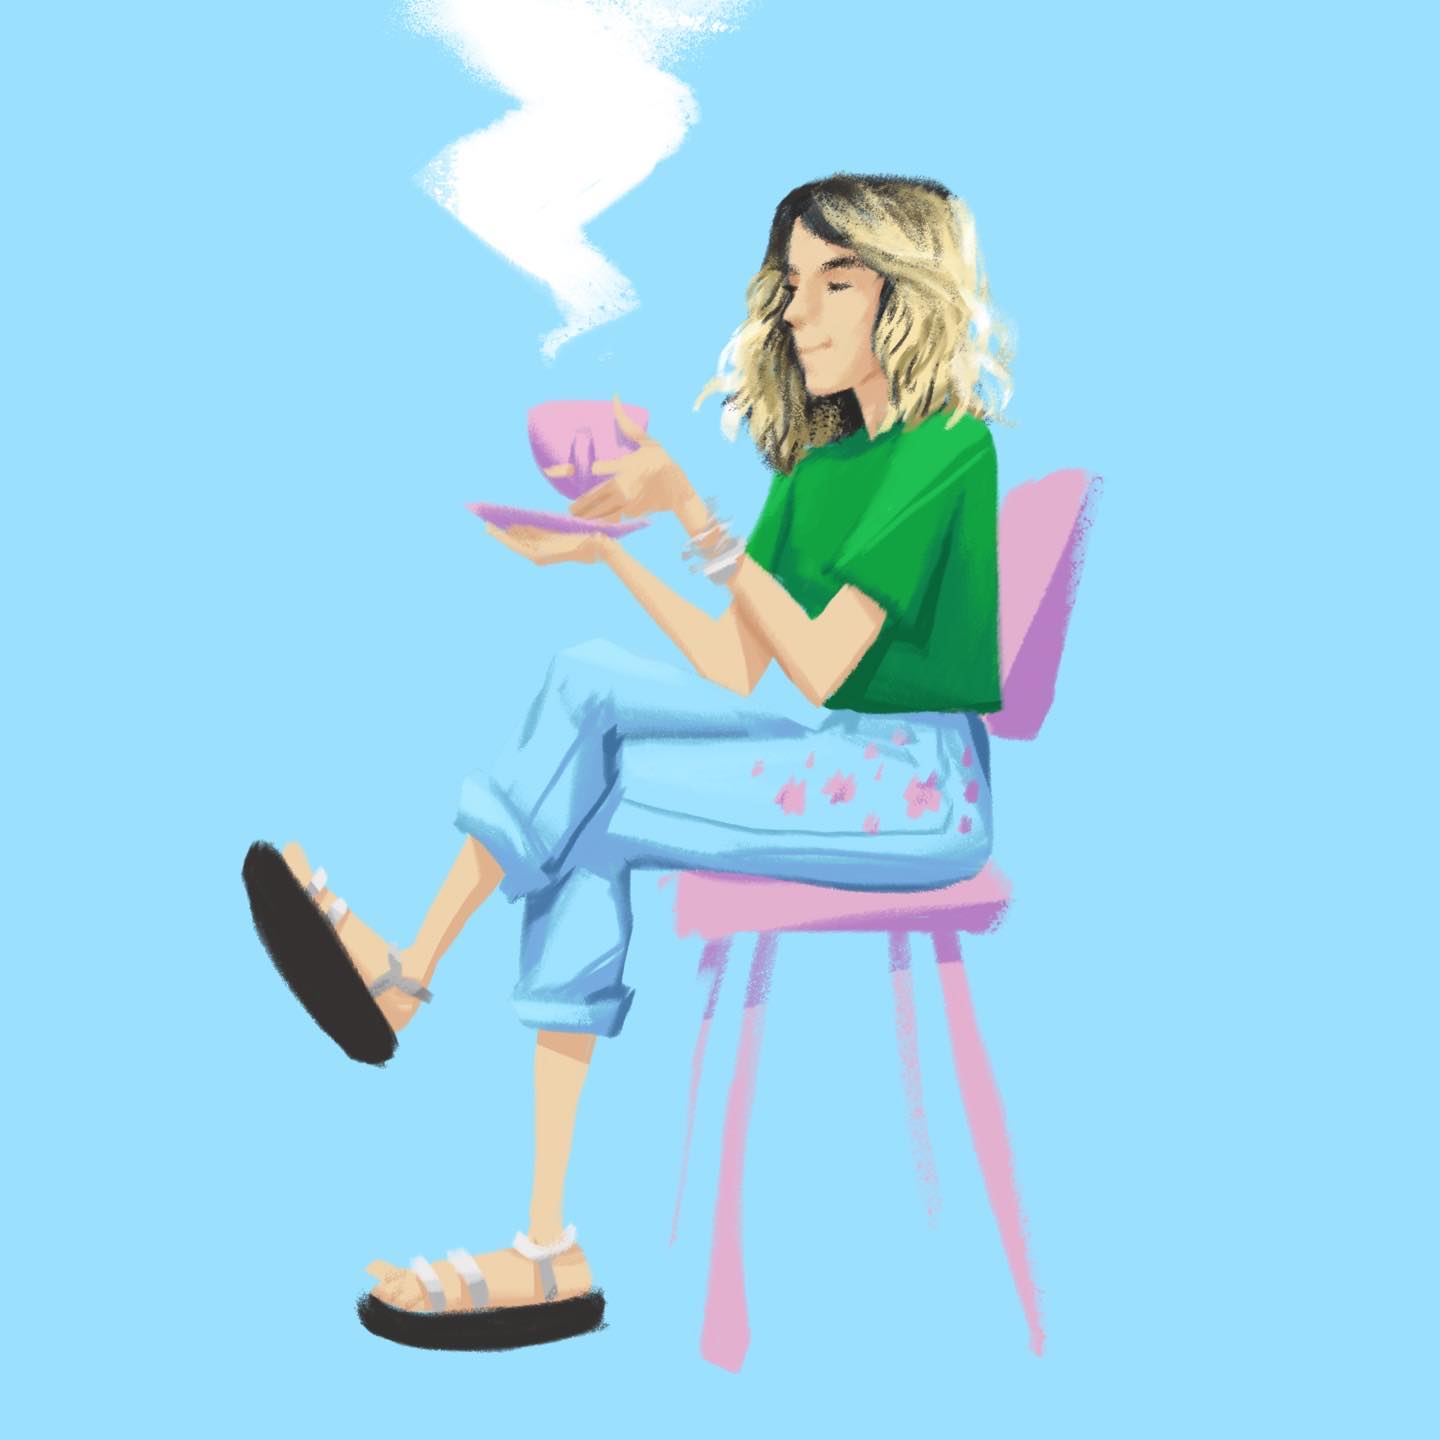 White blonde woman wearing a green t-shirt and blue jeans, drinking tea sitting on a pink stool in front of a small table in a light blue background